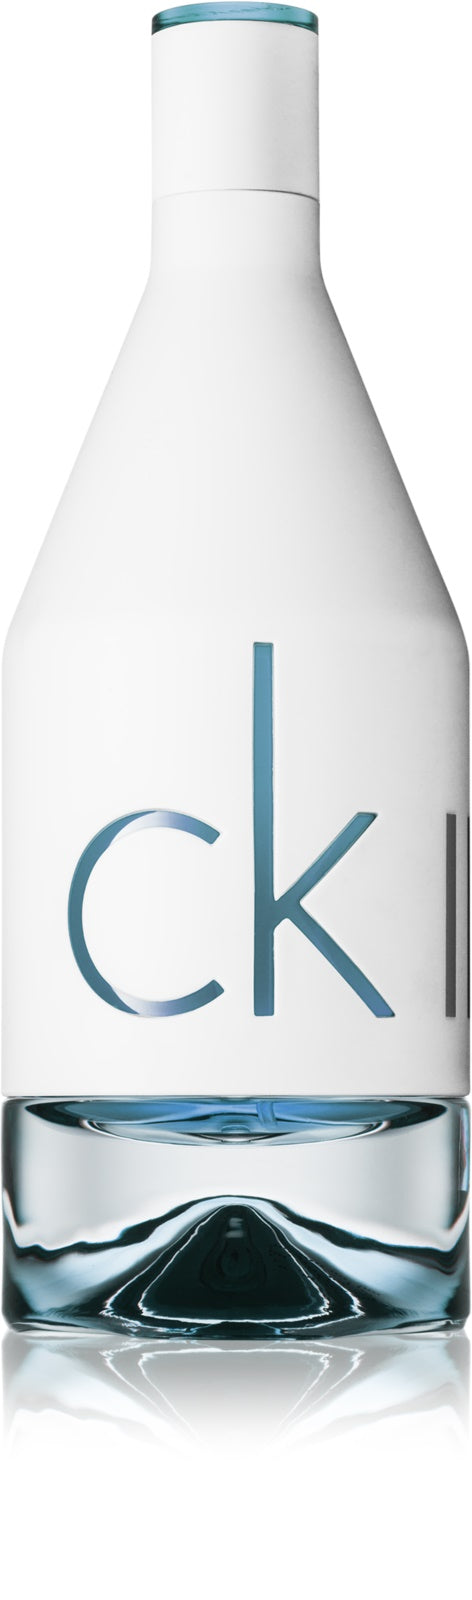 CK IN2U EDT for Men - Perfume Planet 